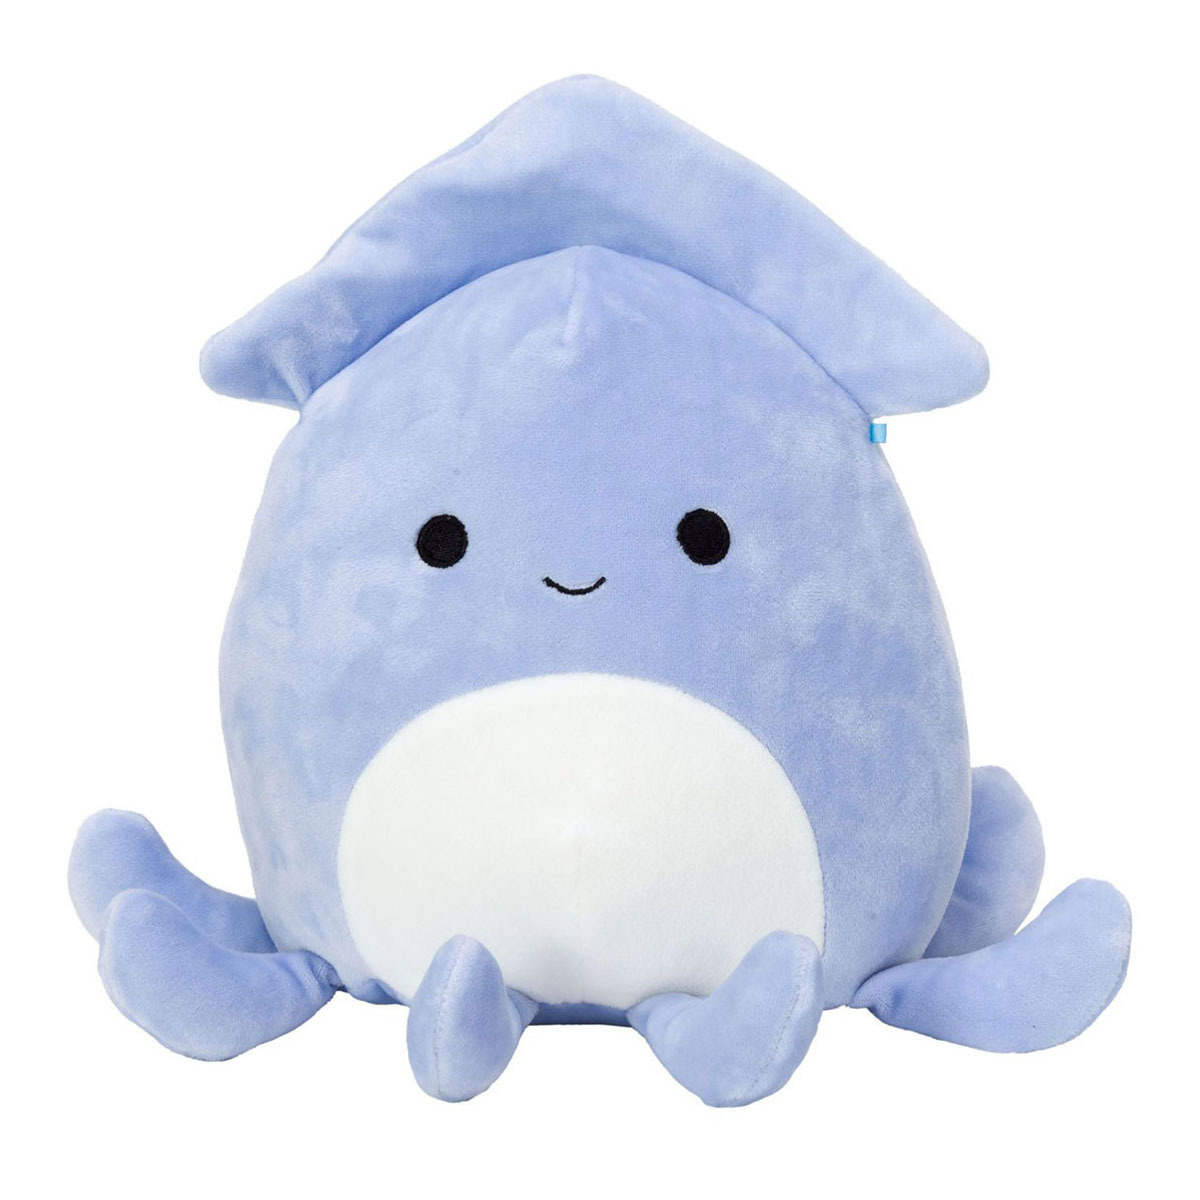  Squishmallows 20cm - Stacy the Squid